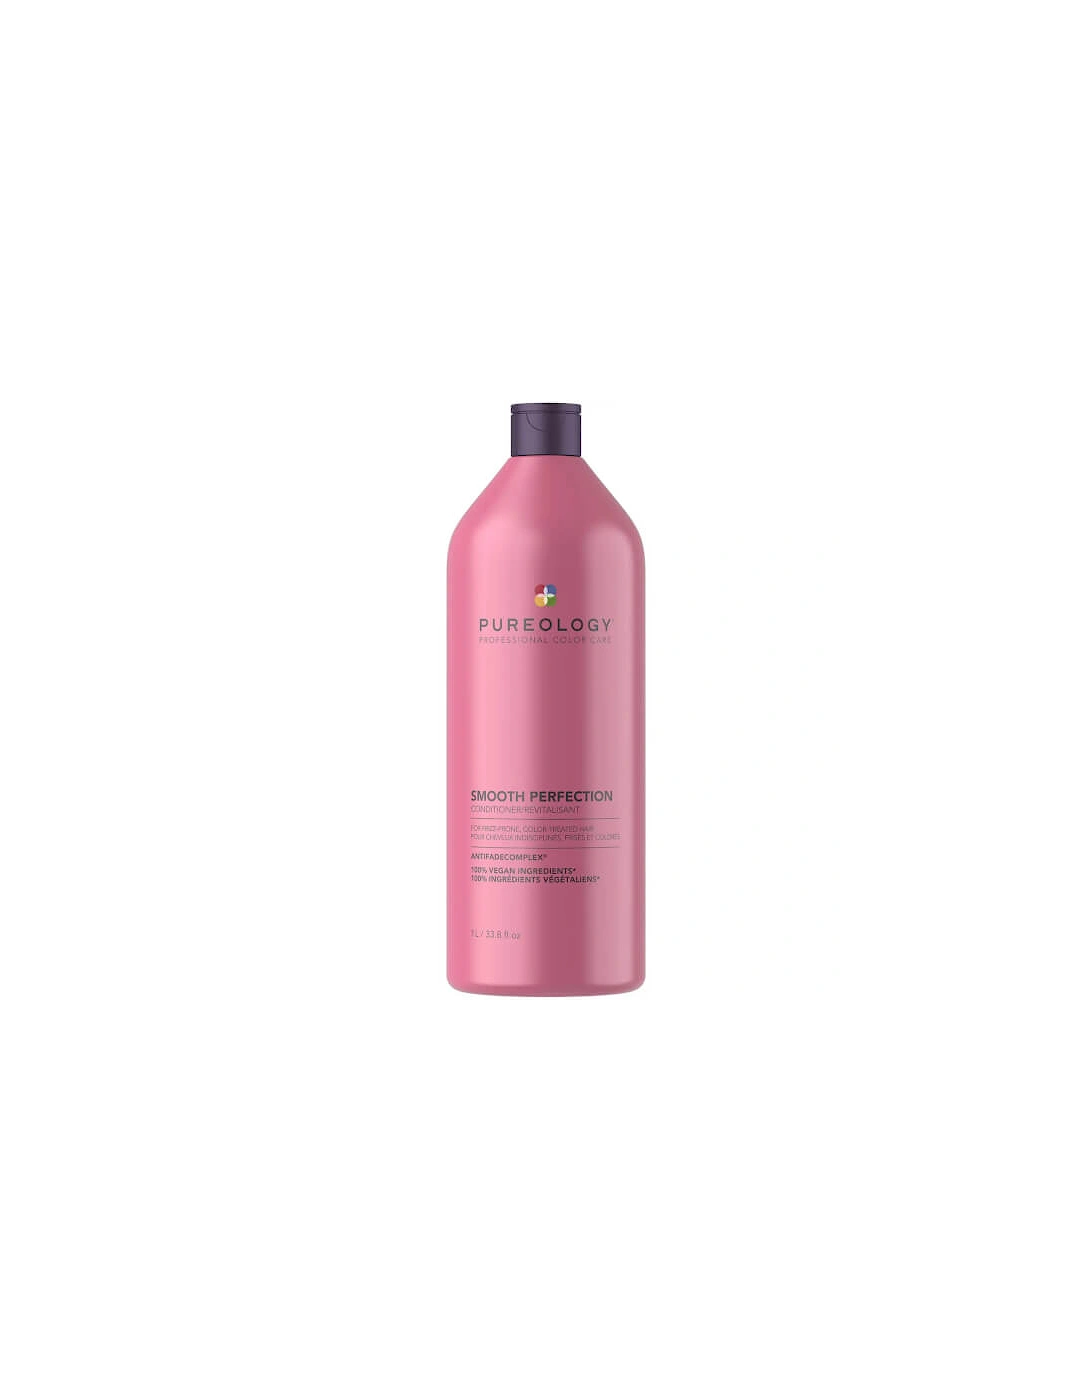 Smooth Perfection Shampoo 1000ml - Pureology, 2 of 1